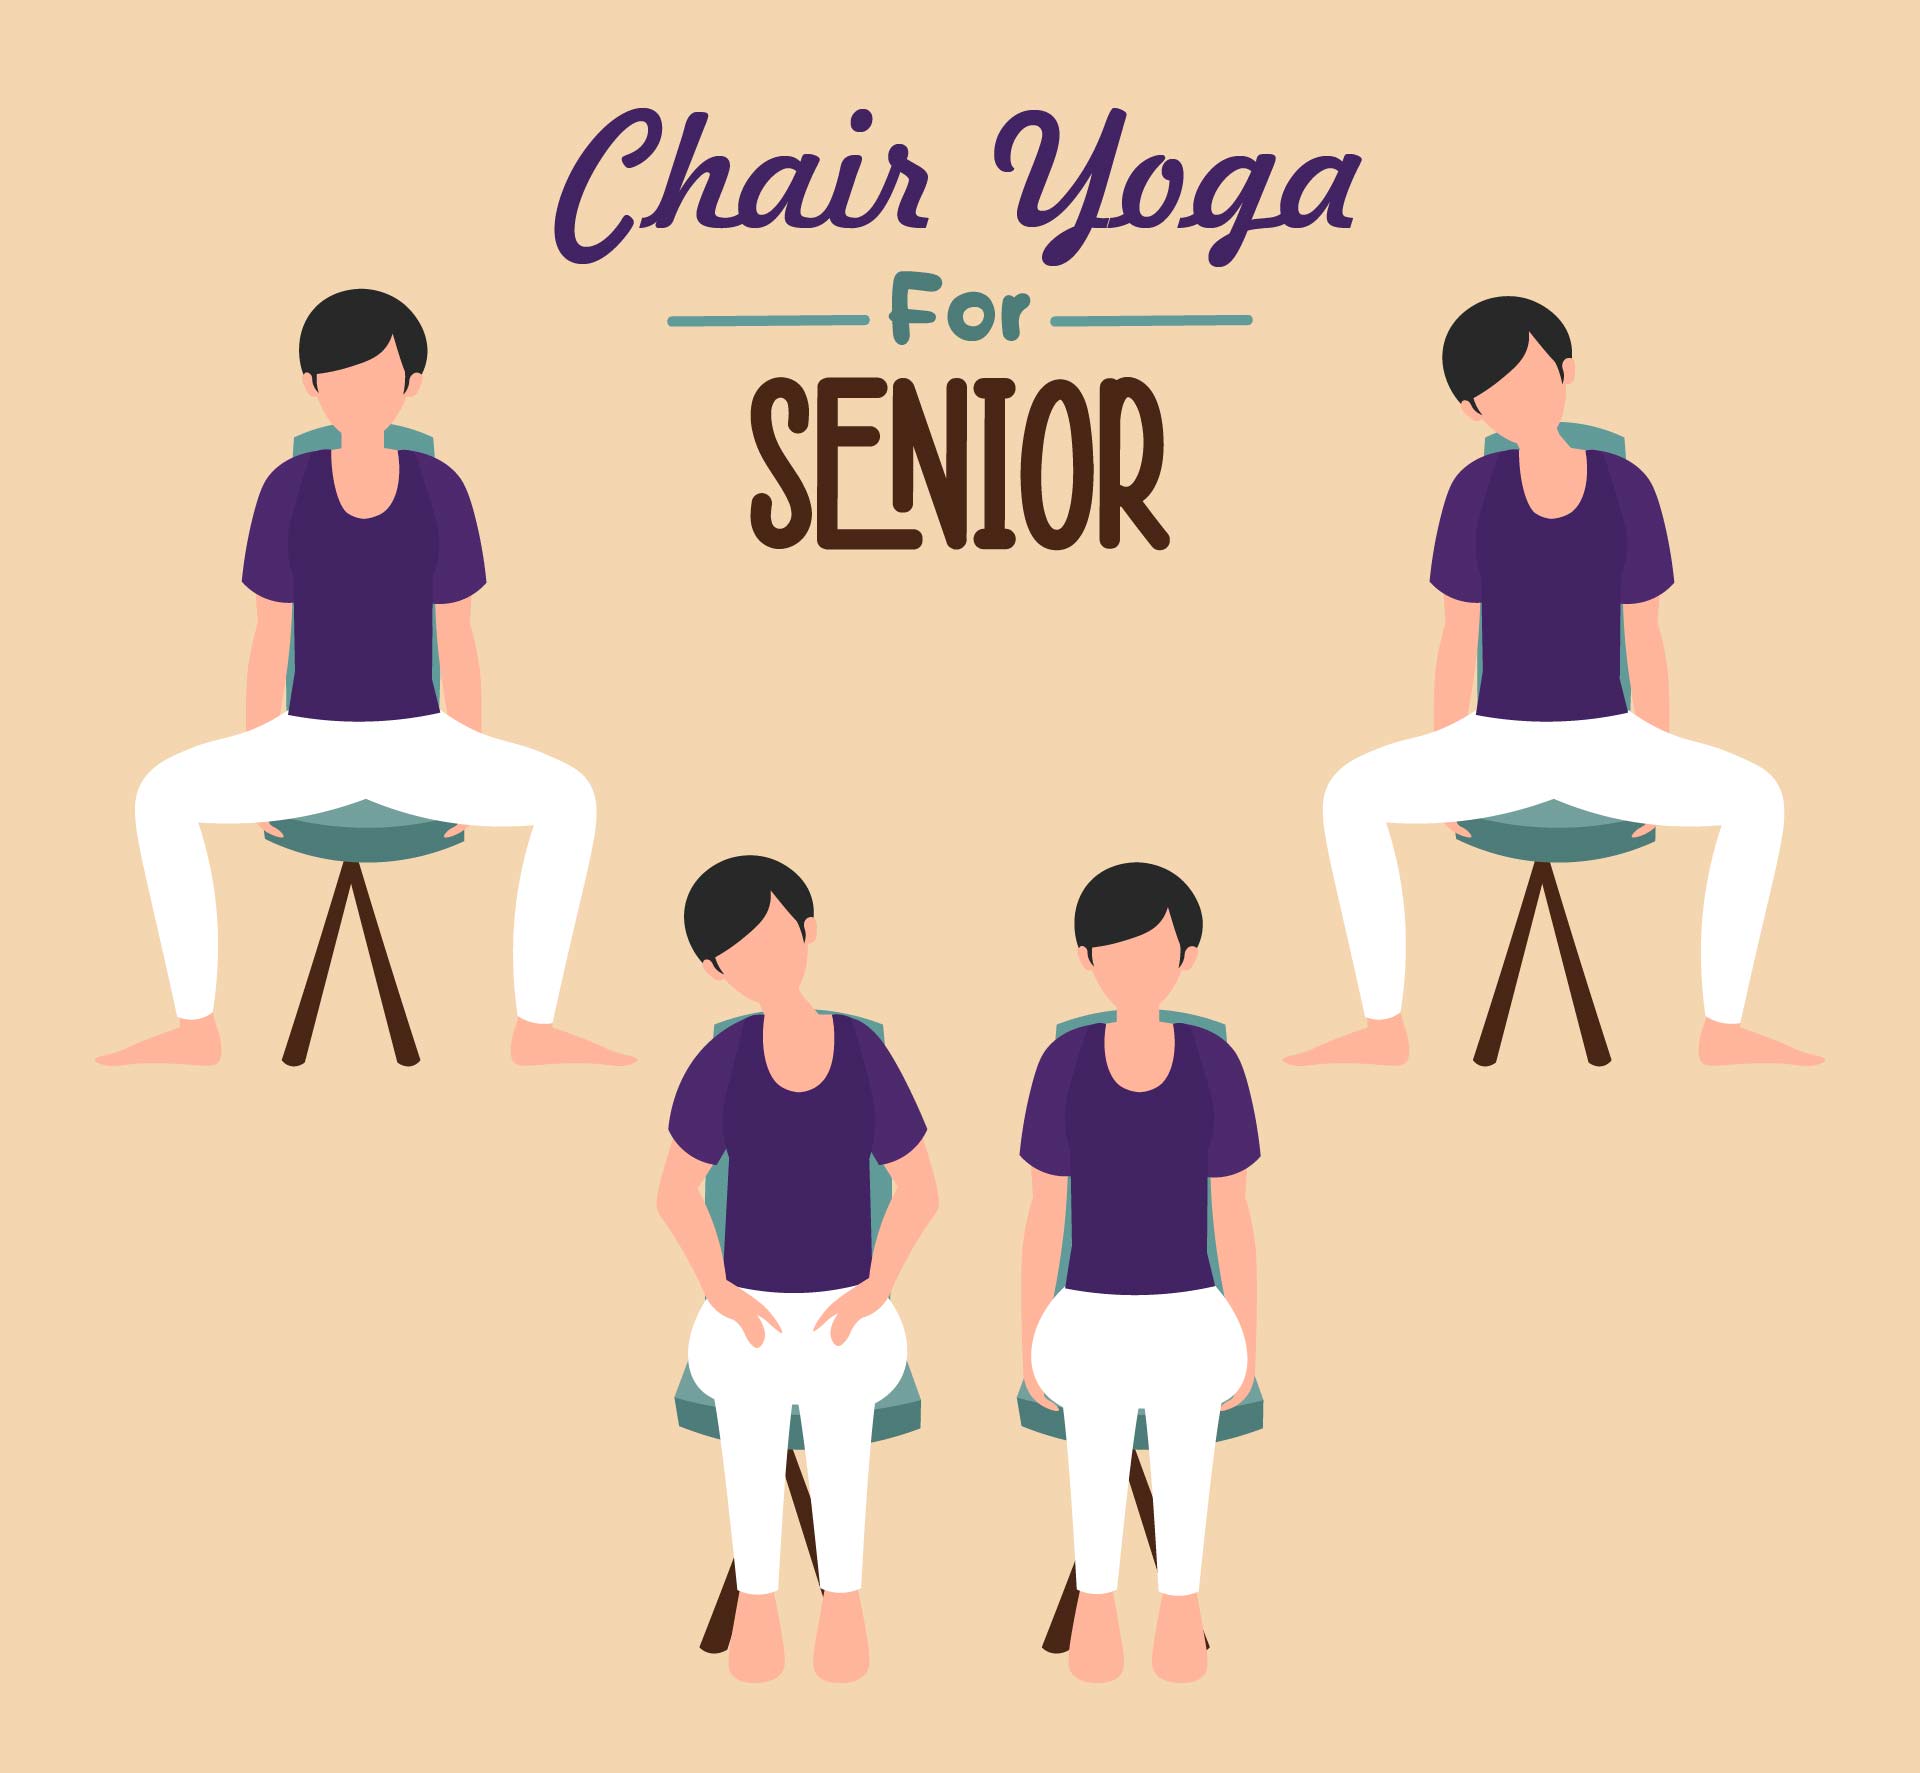 8 Best Images of Printable Chair Yoga Routines - Senior Chair Yoga ...